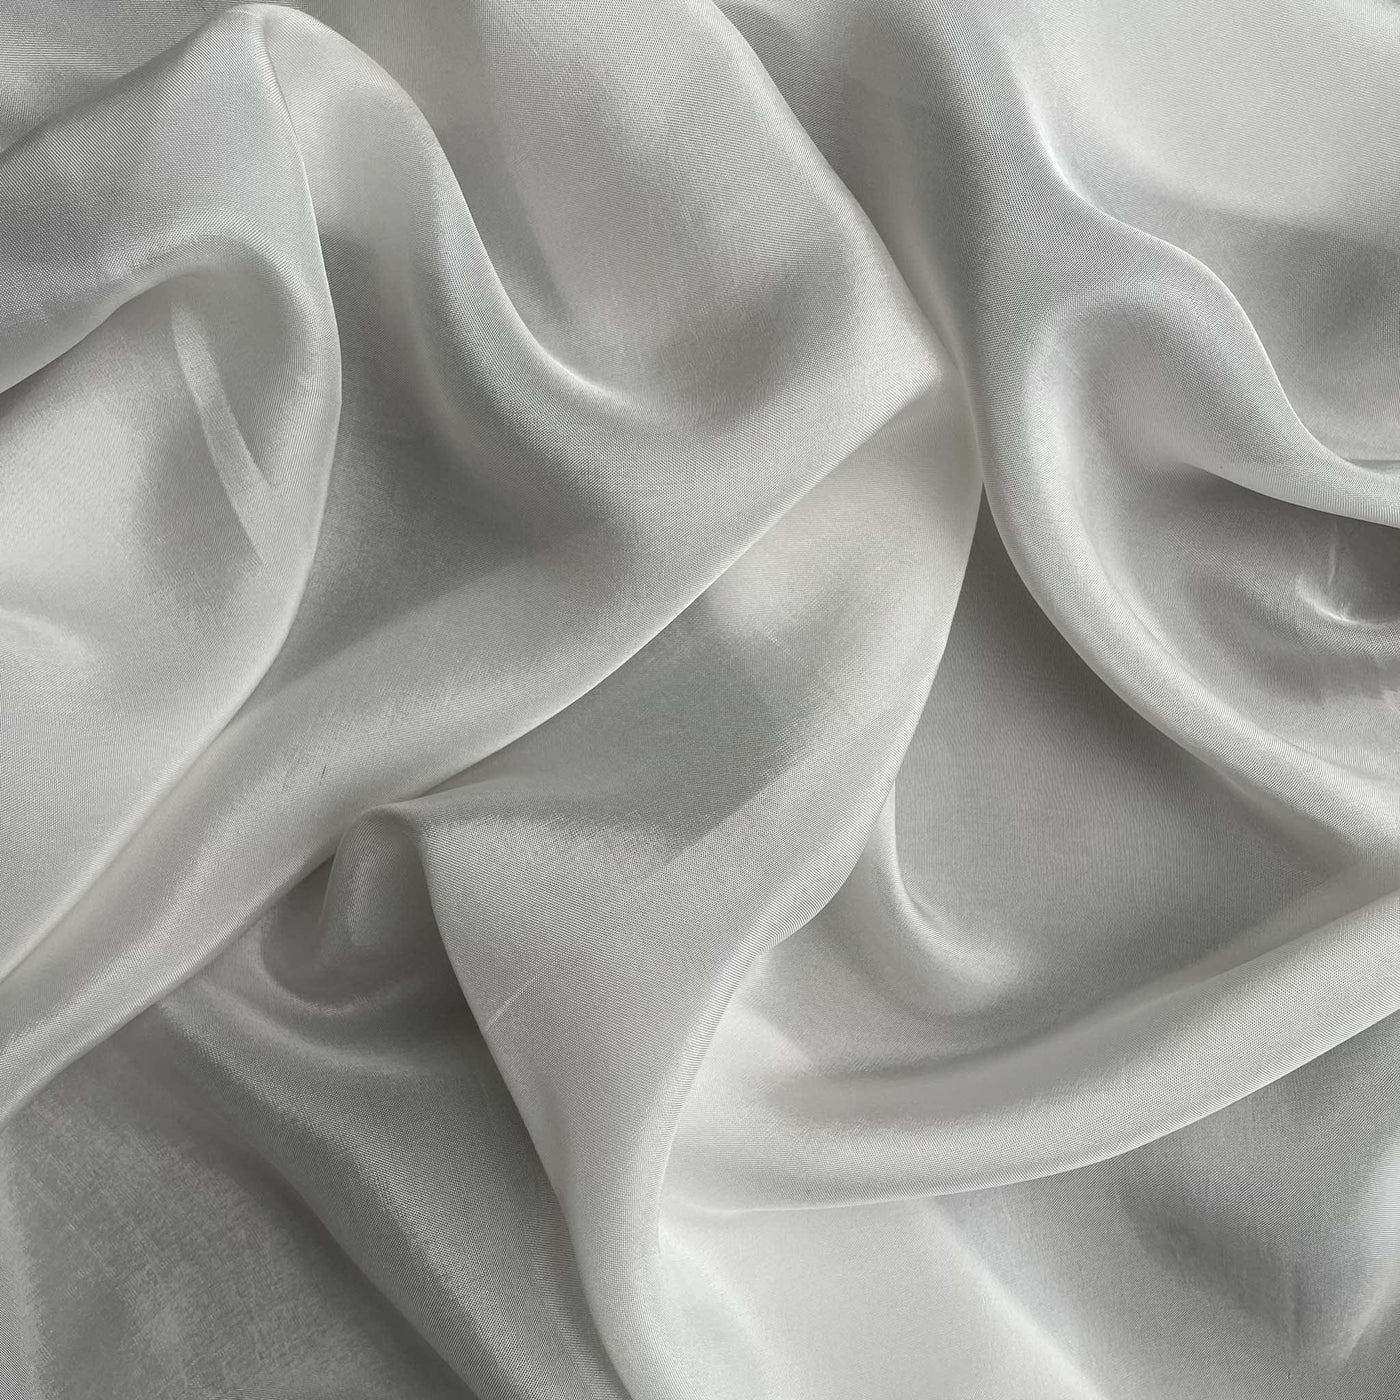 Fabric Pandit Fabric White Dyeable Pure Viscose Flat Crepe Plain Fabric (Width 43 Inches, 73 Gms)